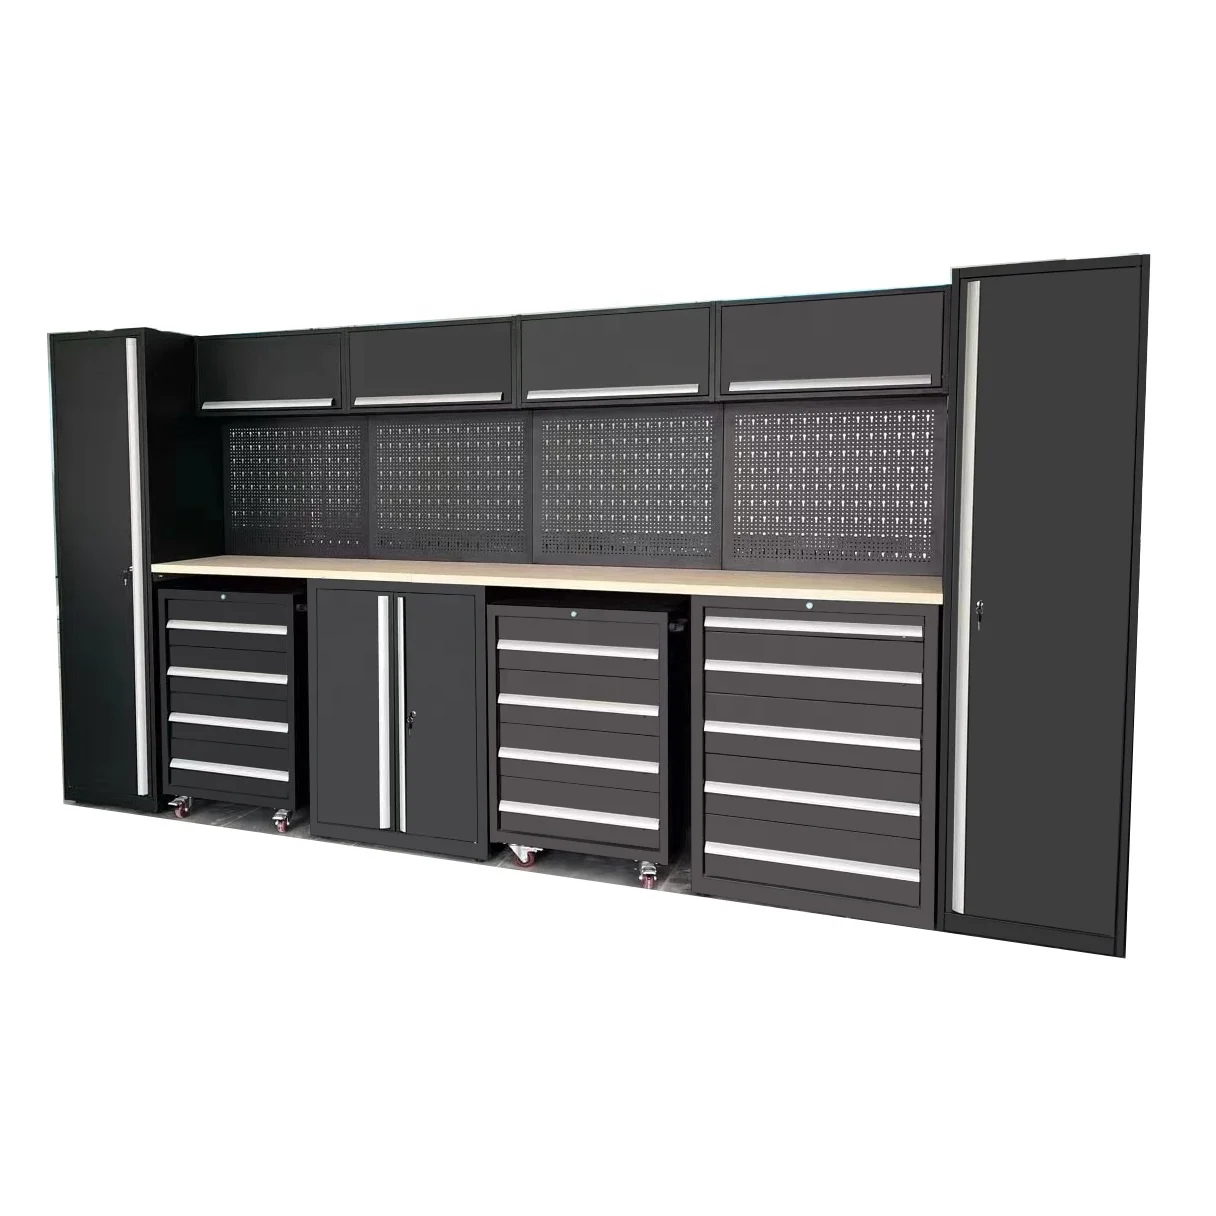 

factory heavy duty steel cabinets modular garage storage tool box workbench for workshop workplace tool cabinet